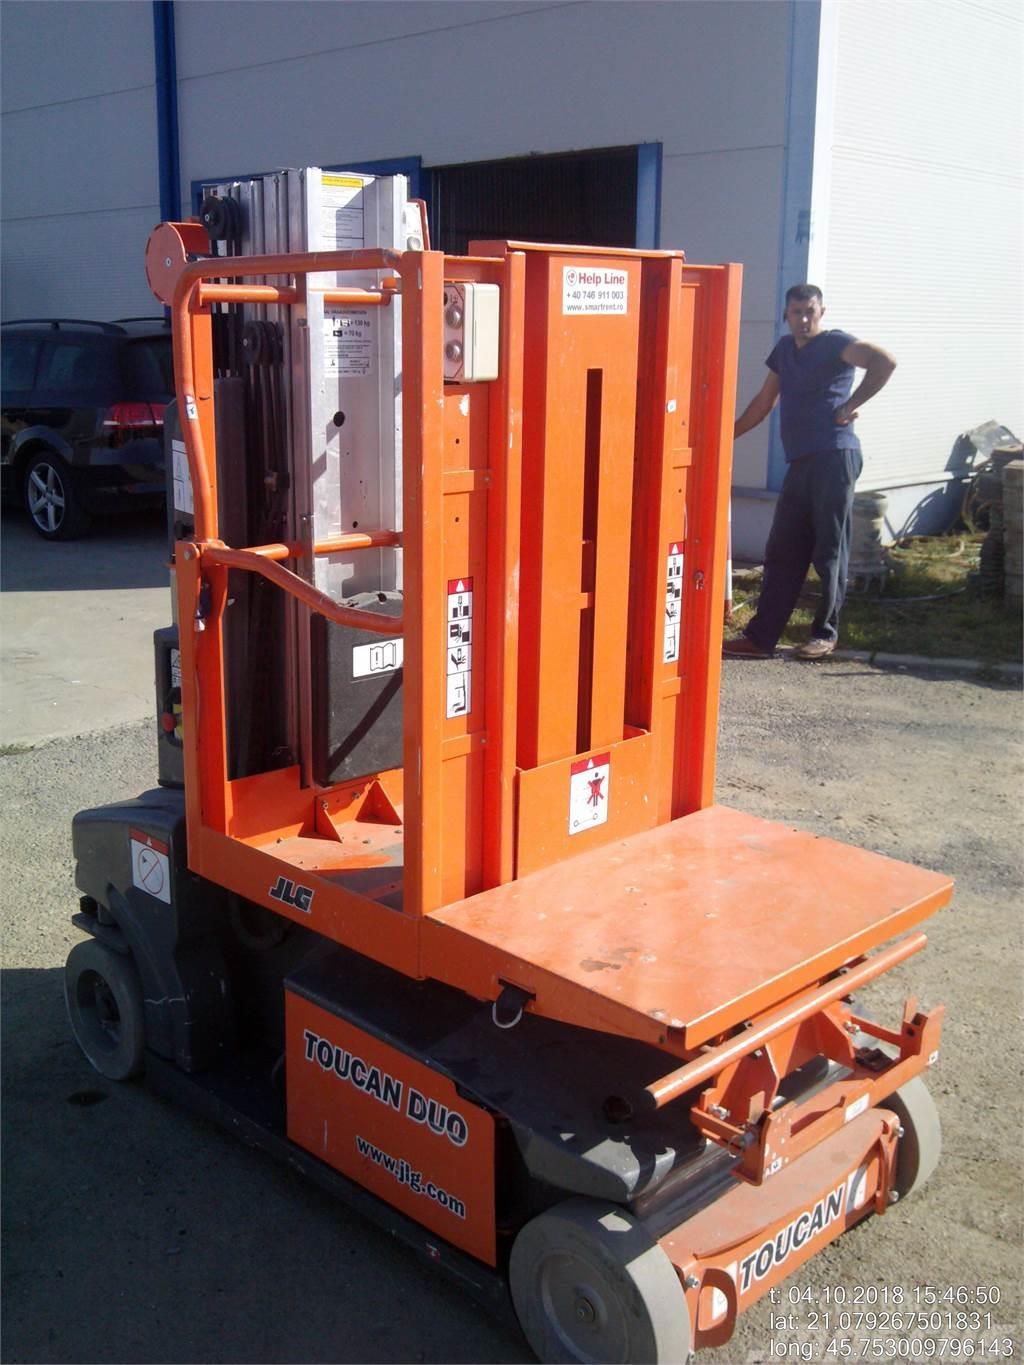 JLG Toucan duo Used Personnel lifts and access elevators